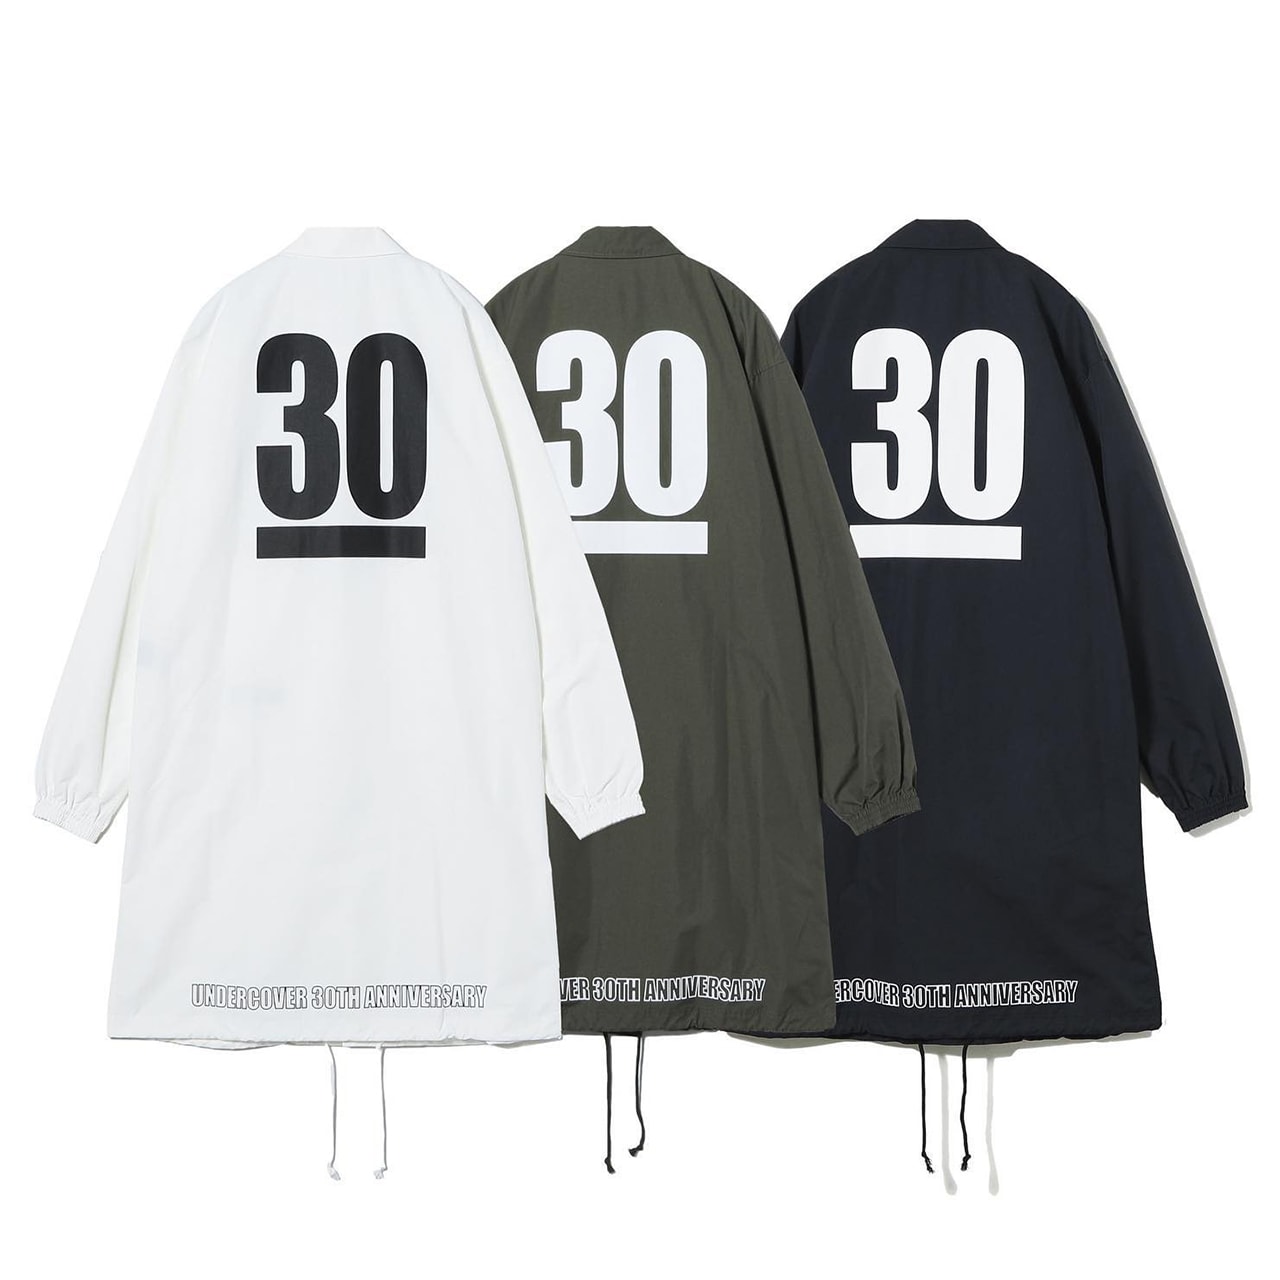 UNDERCOVER 30th Anniversary Apparel Collection clothing hoodies mods parka coat bear u logo graphic release date info buy tee shirt bear